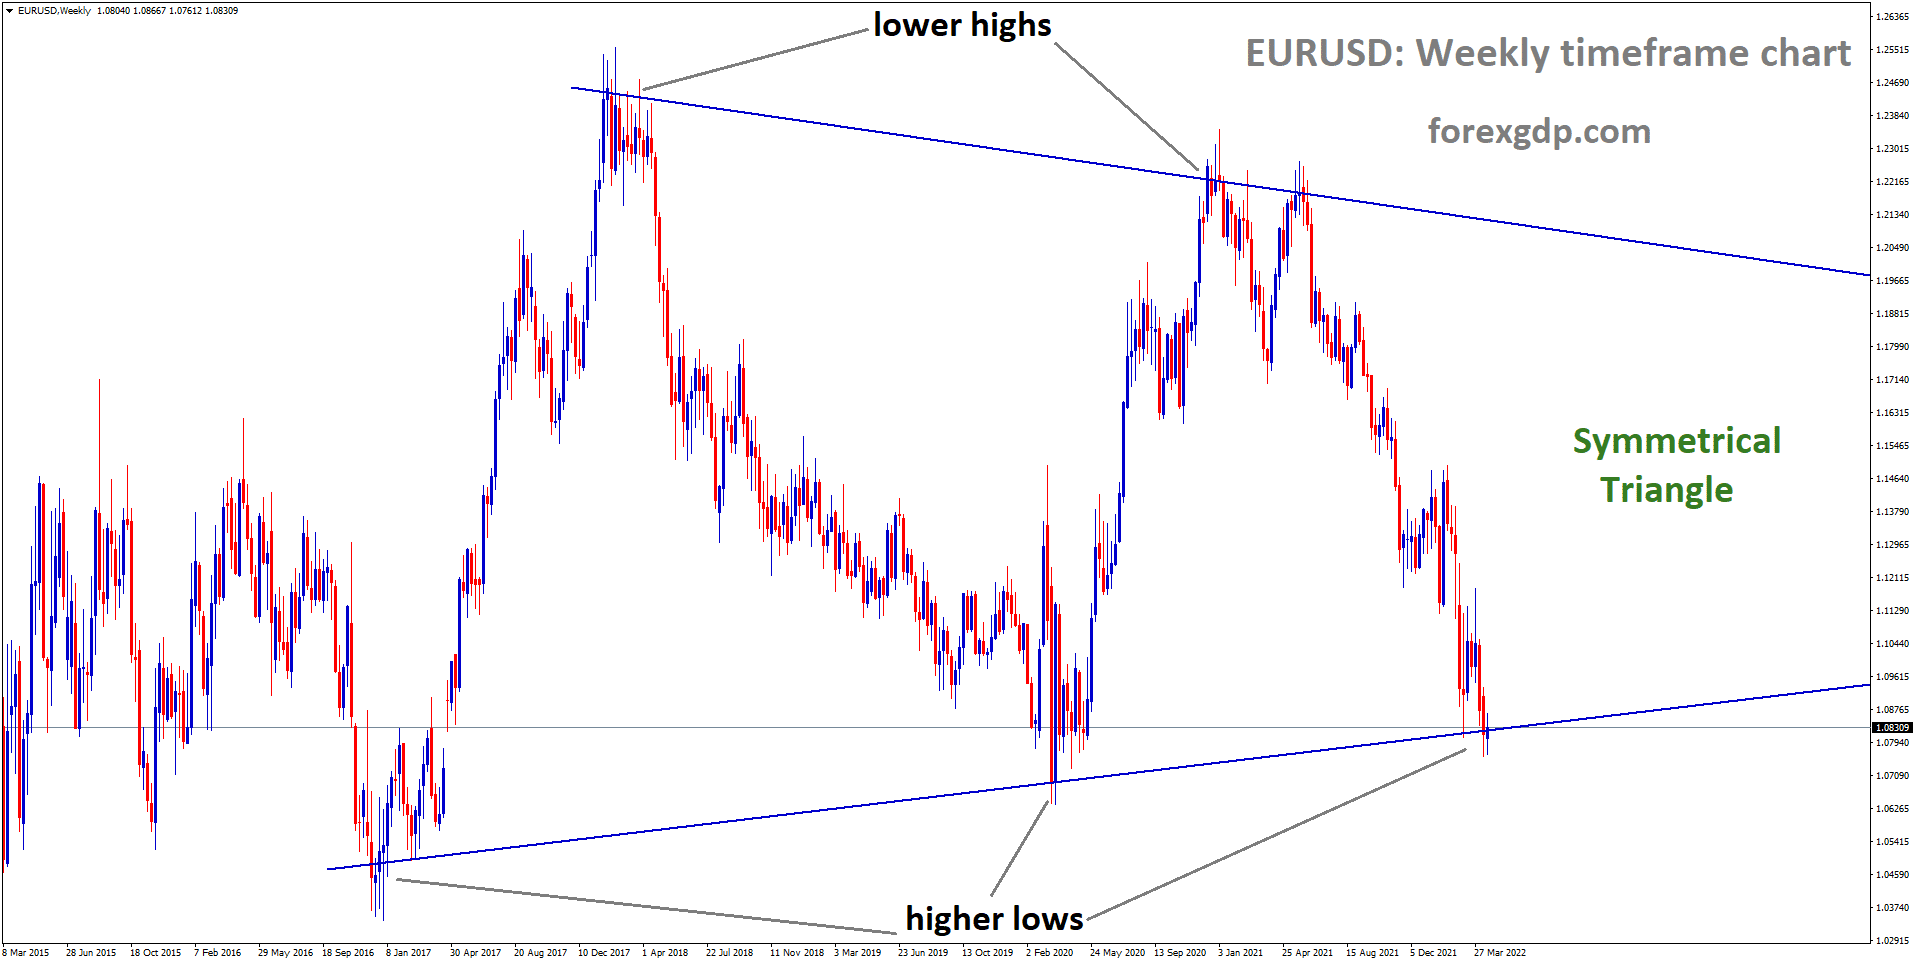 EURUSD Moving in Symmetrical Trianglel pattern and reached higher lows